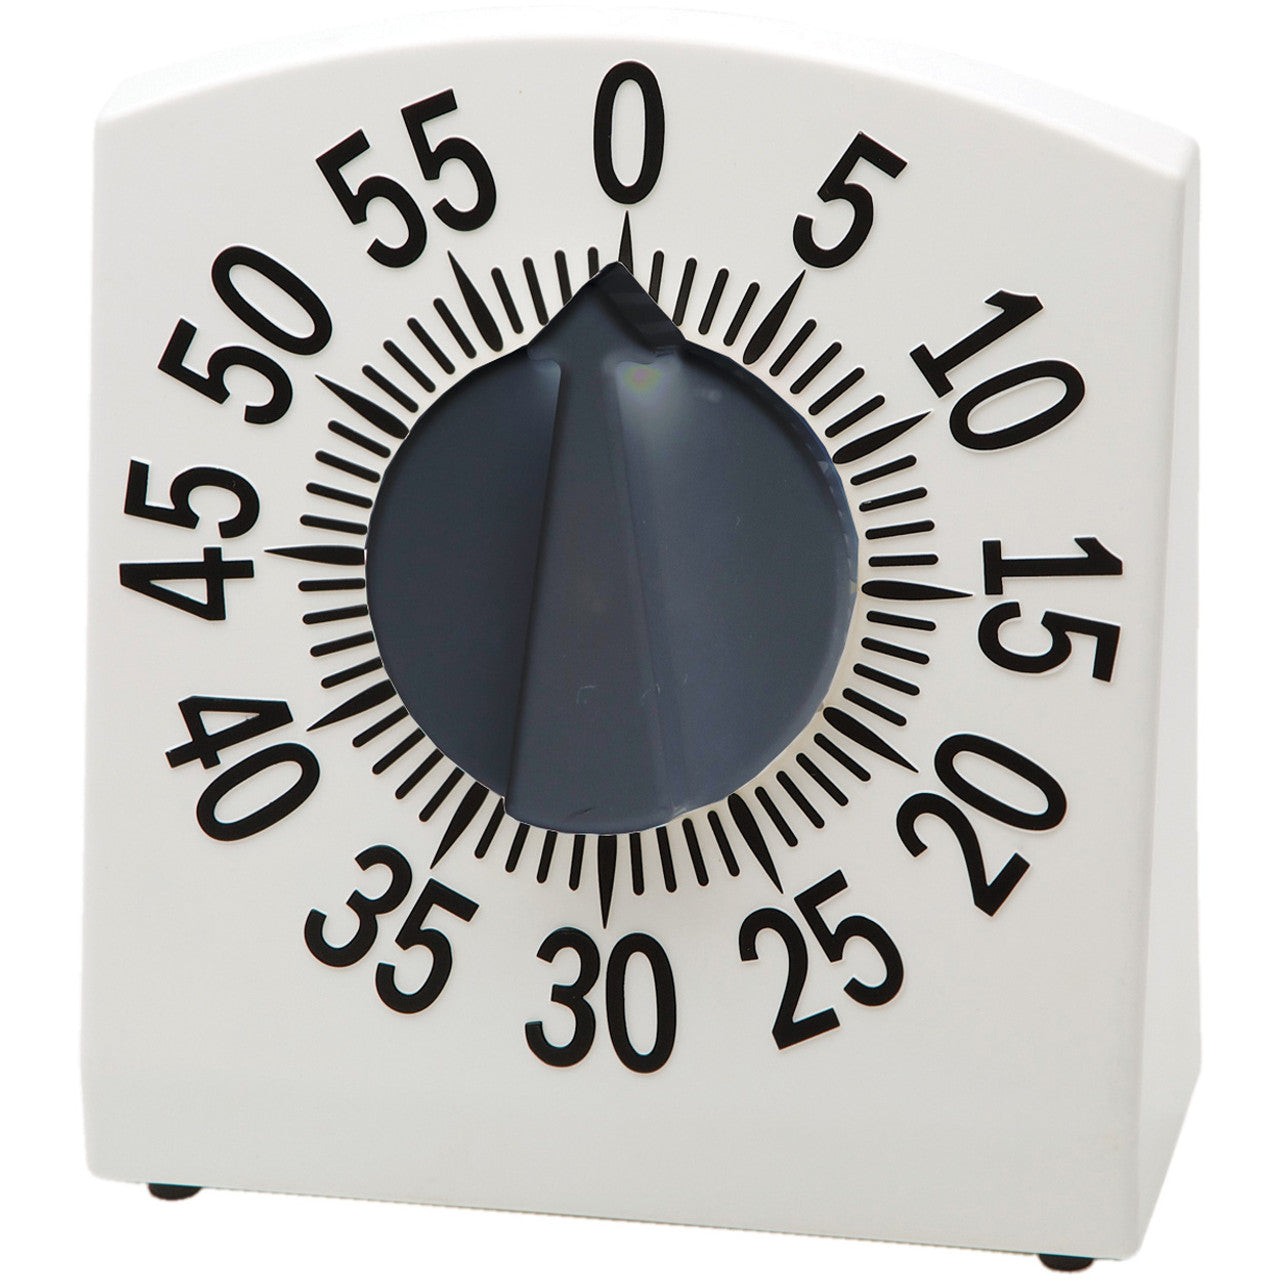 Tactile Timer with black numbers and dial with a white background.